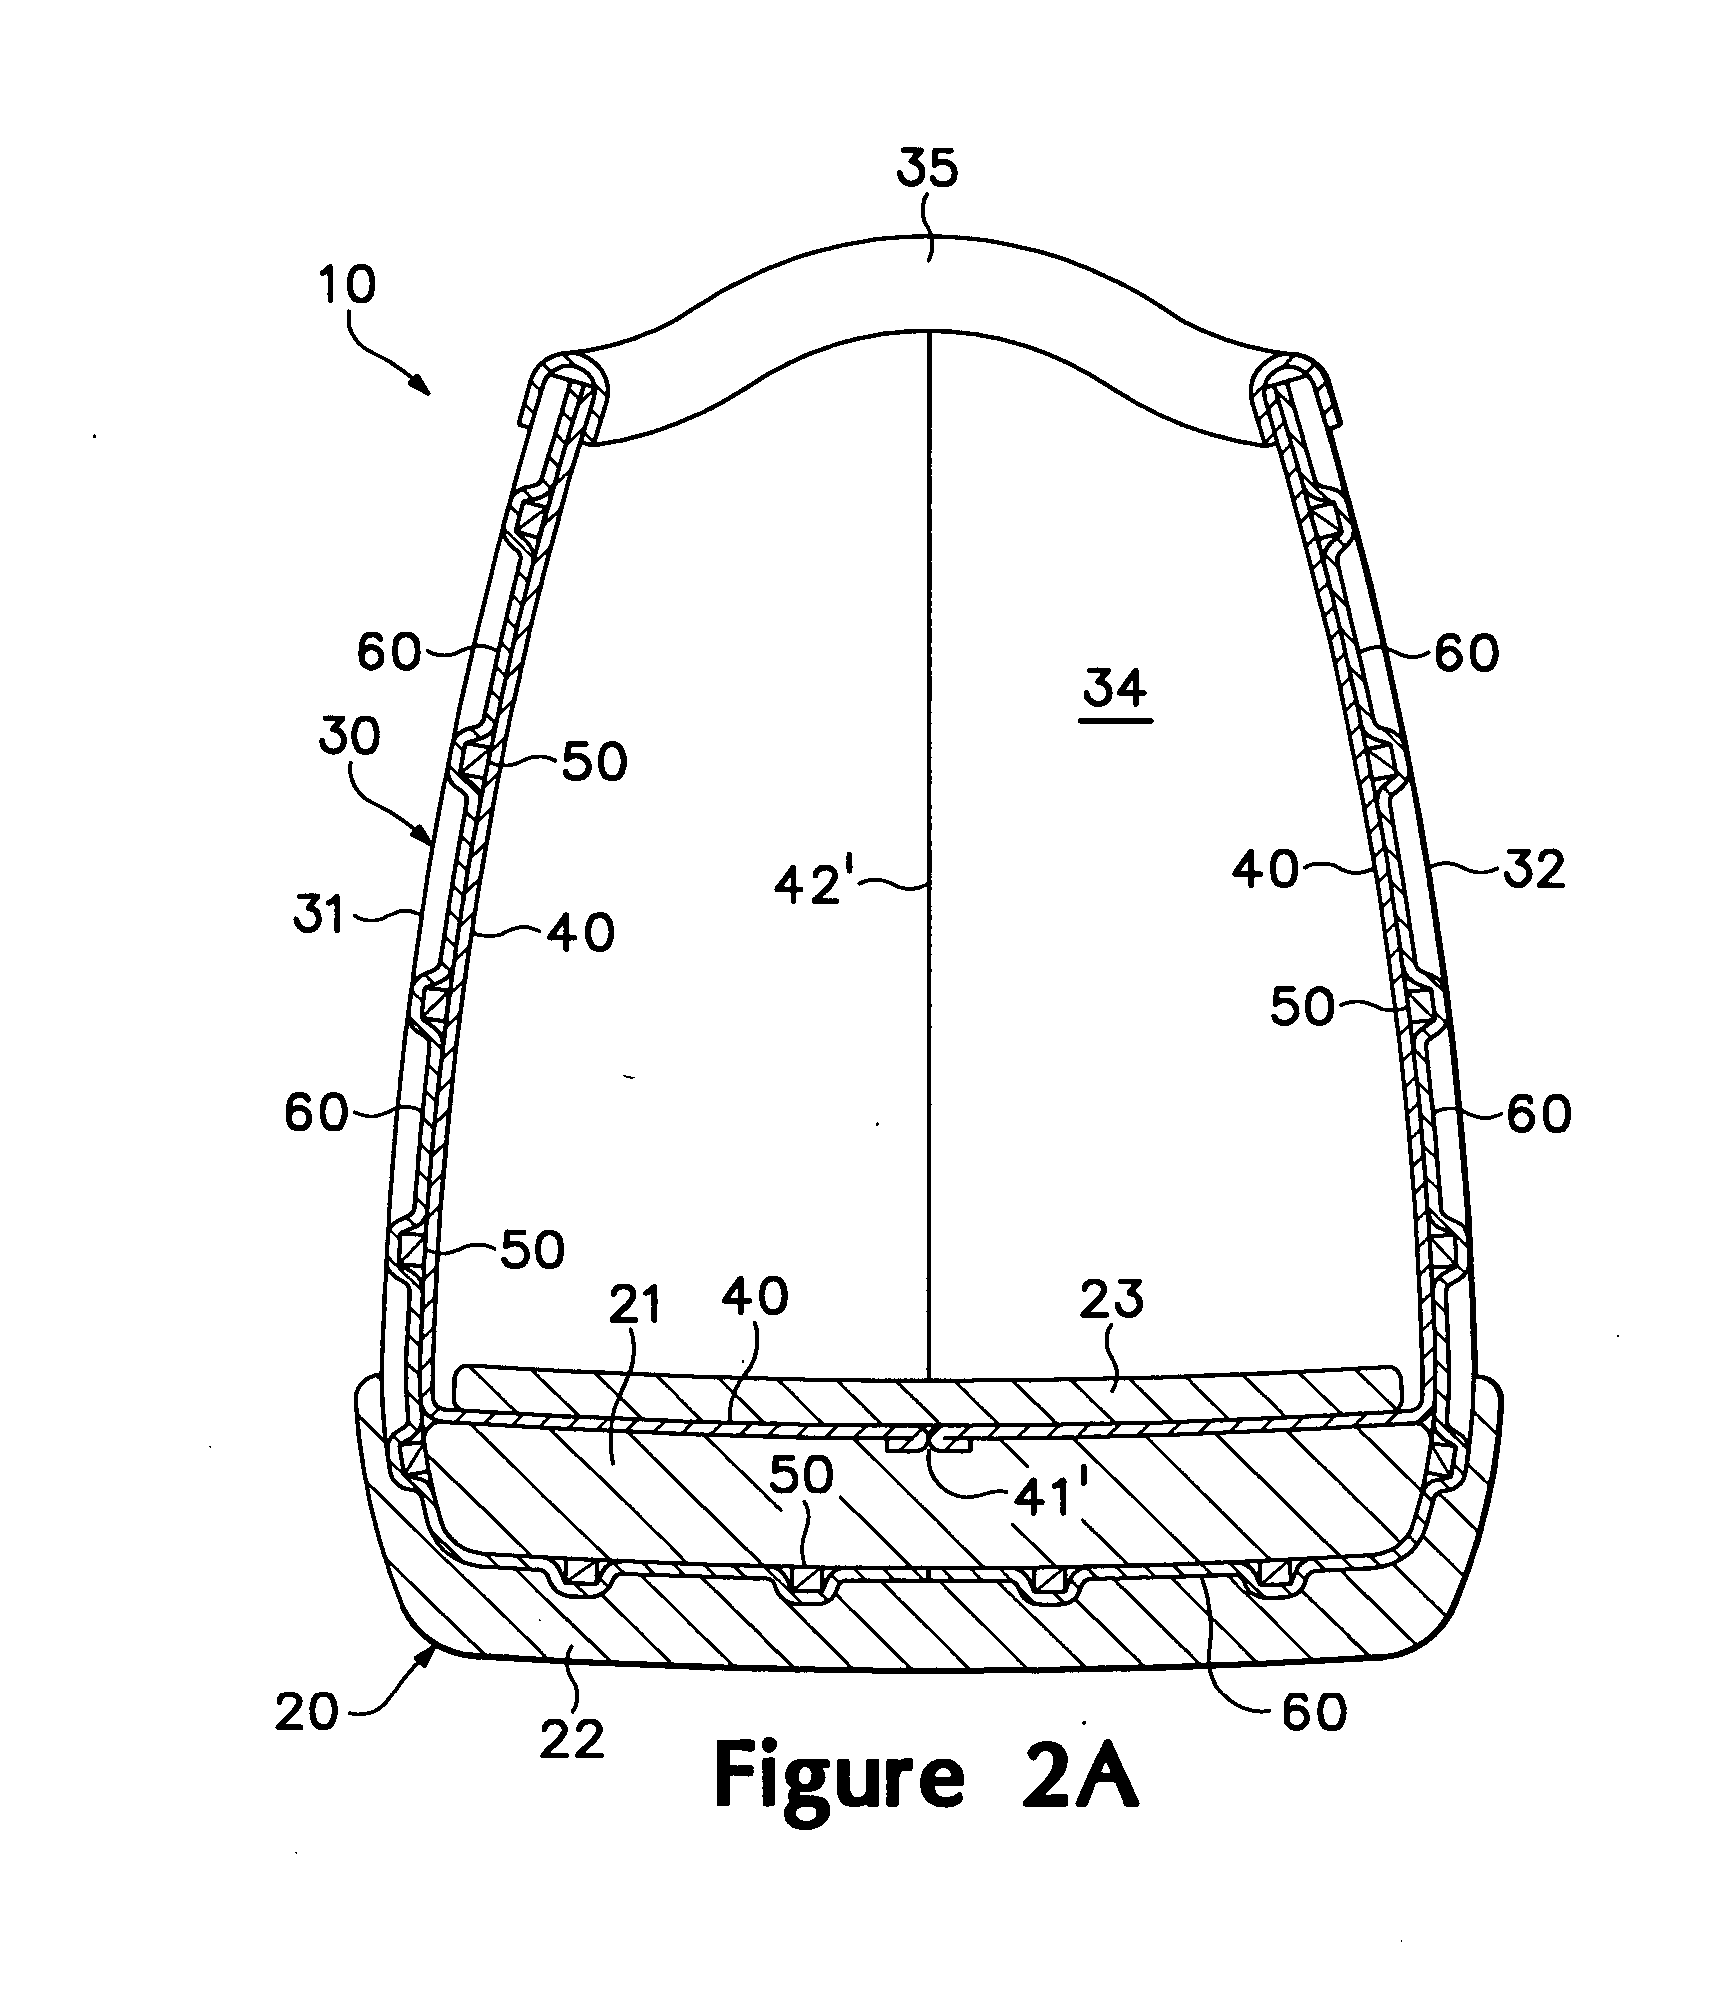 Article of footwear having an upper with a structured intermediate layer